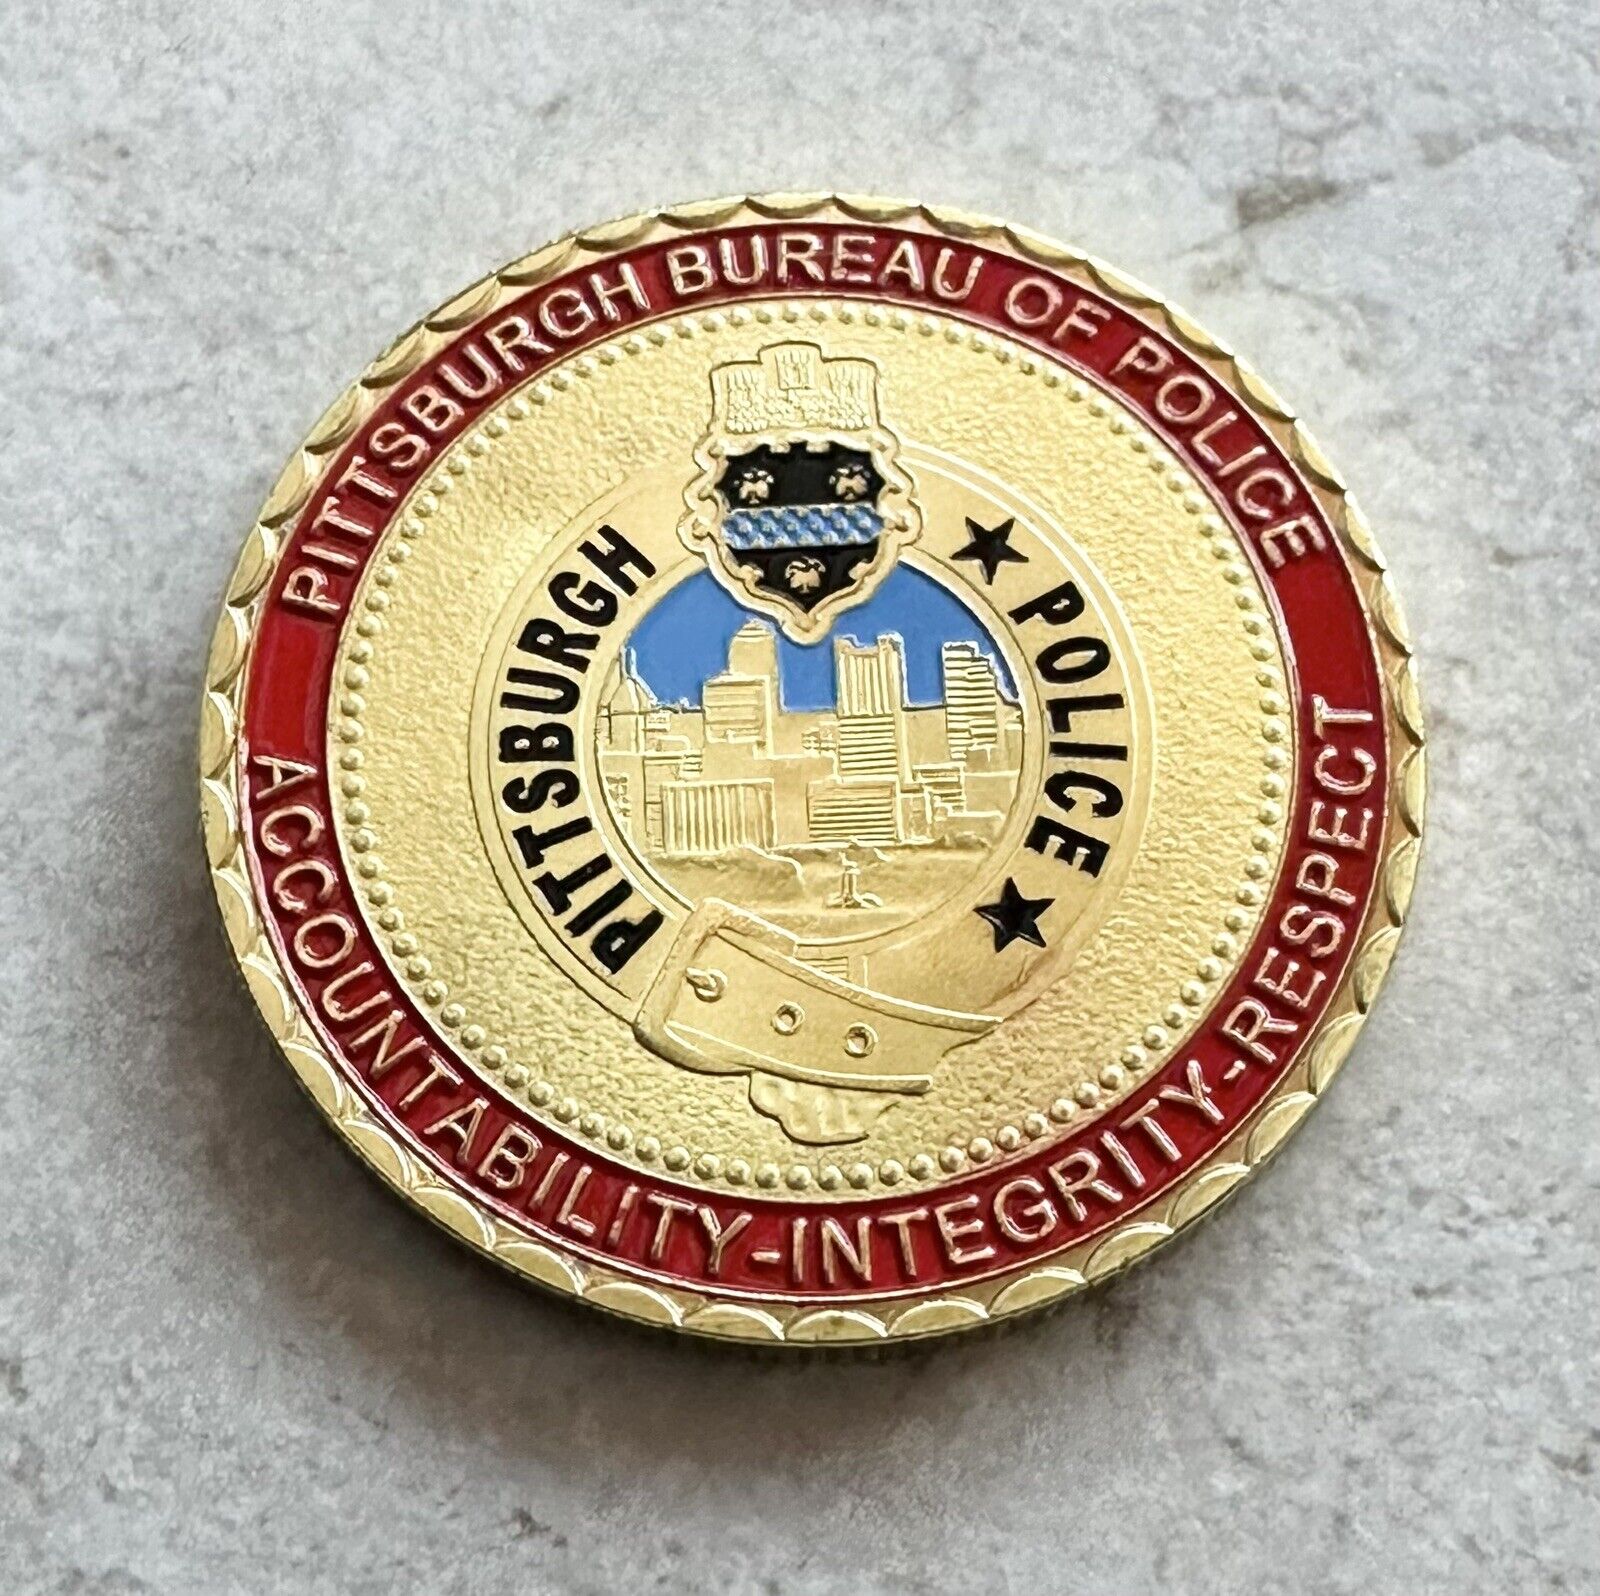 CITY OF PITTSBURGH POLICE DEPT Challenge Coin